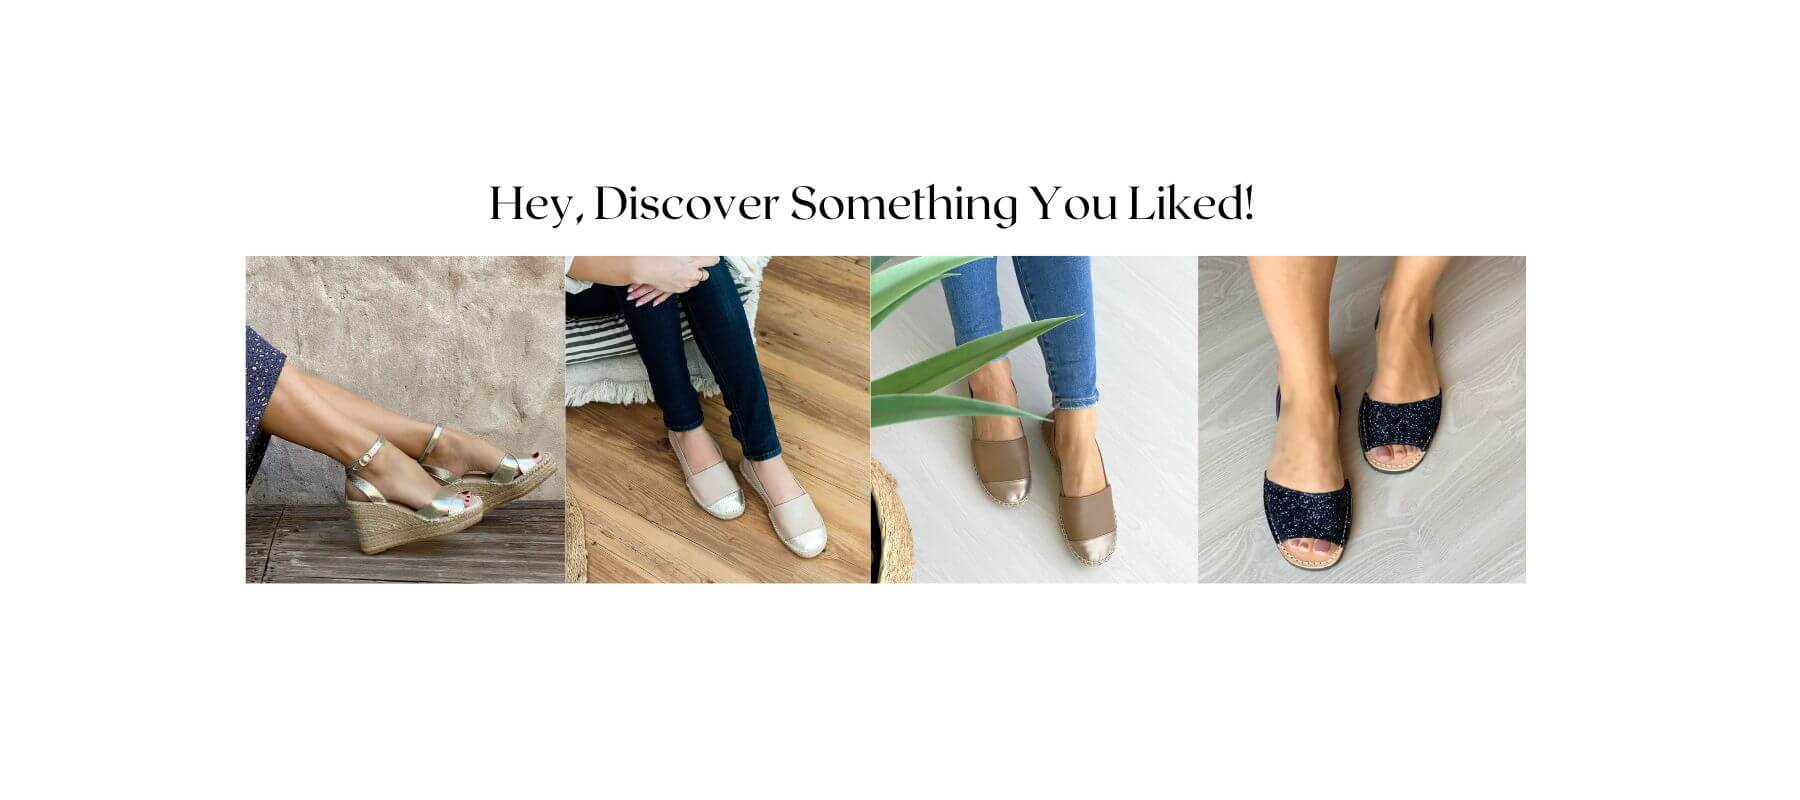 Hey, Discover Something You Liked! - Shoeq